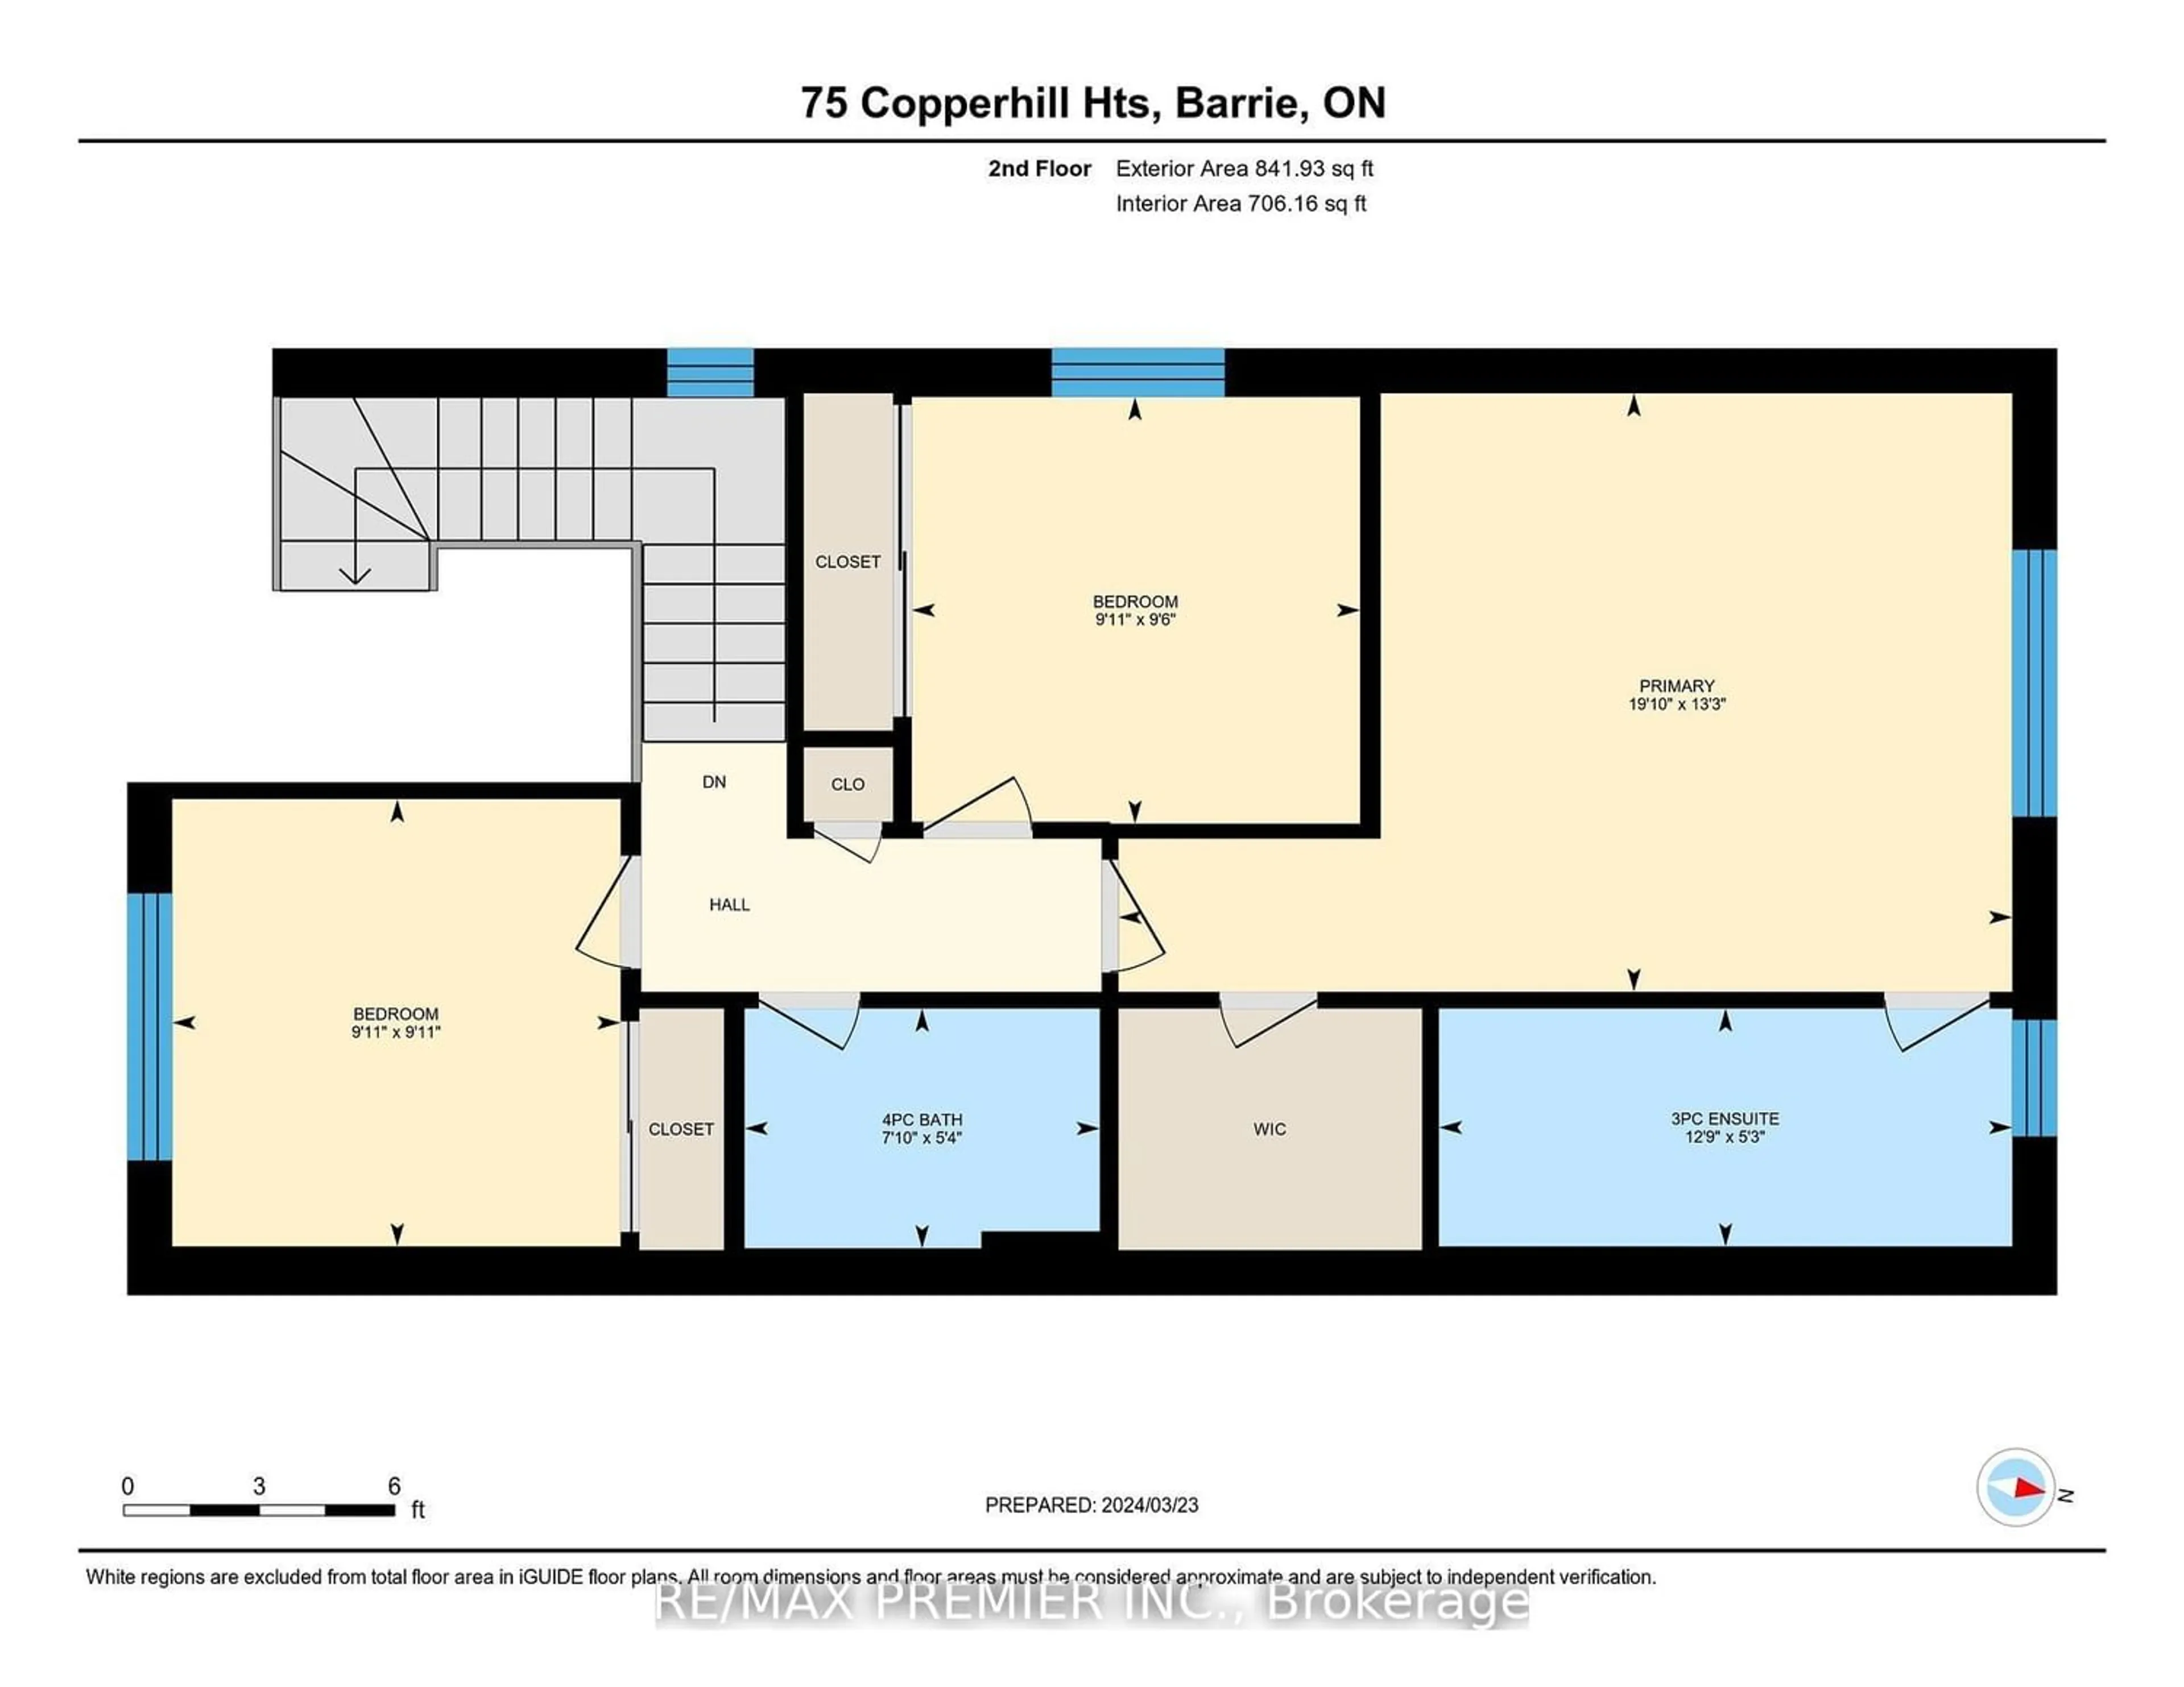 Floor plan for 75 Copperhill Hts, Barrie Ontario L9J 0L1